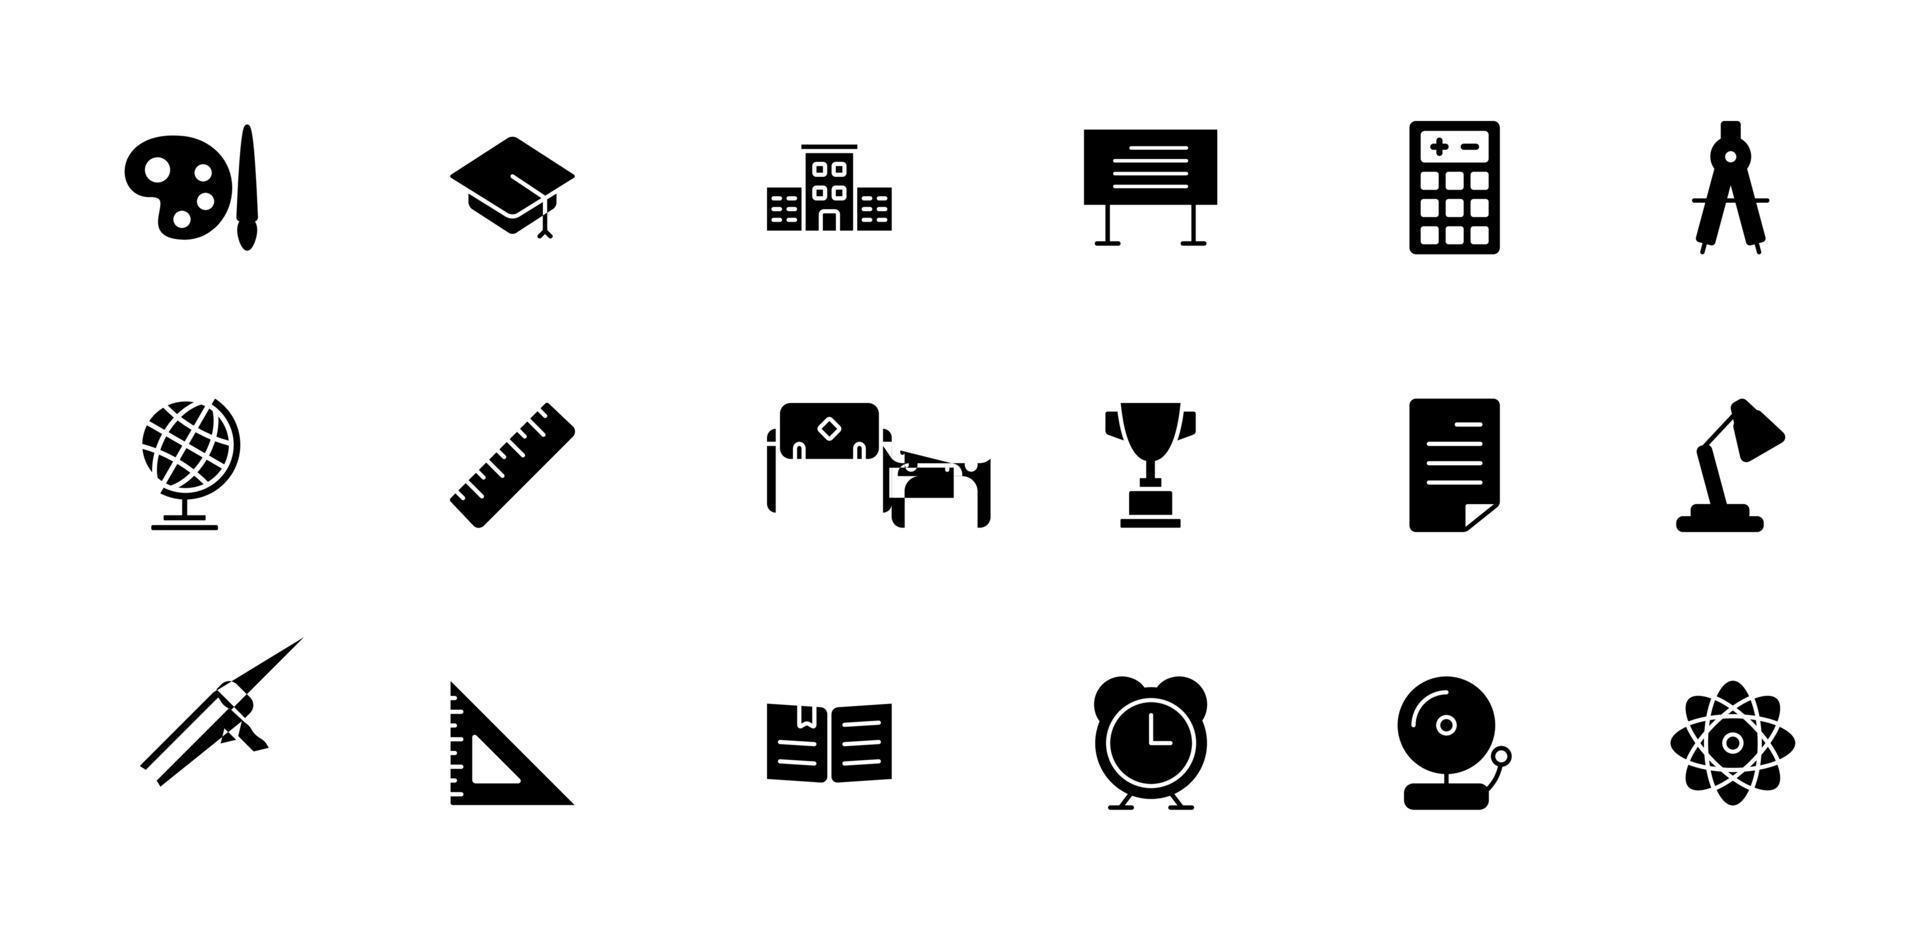 School and education icons vector